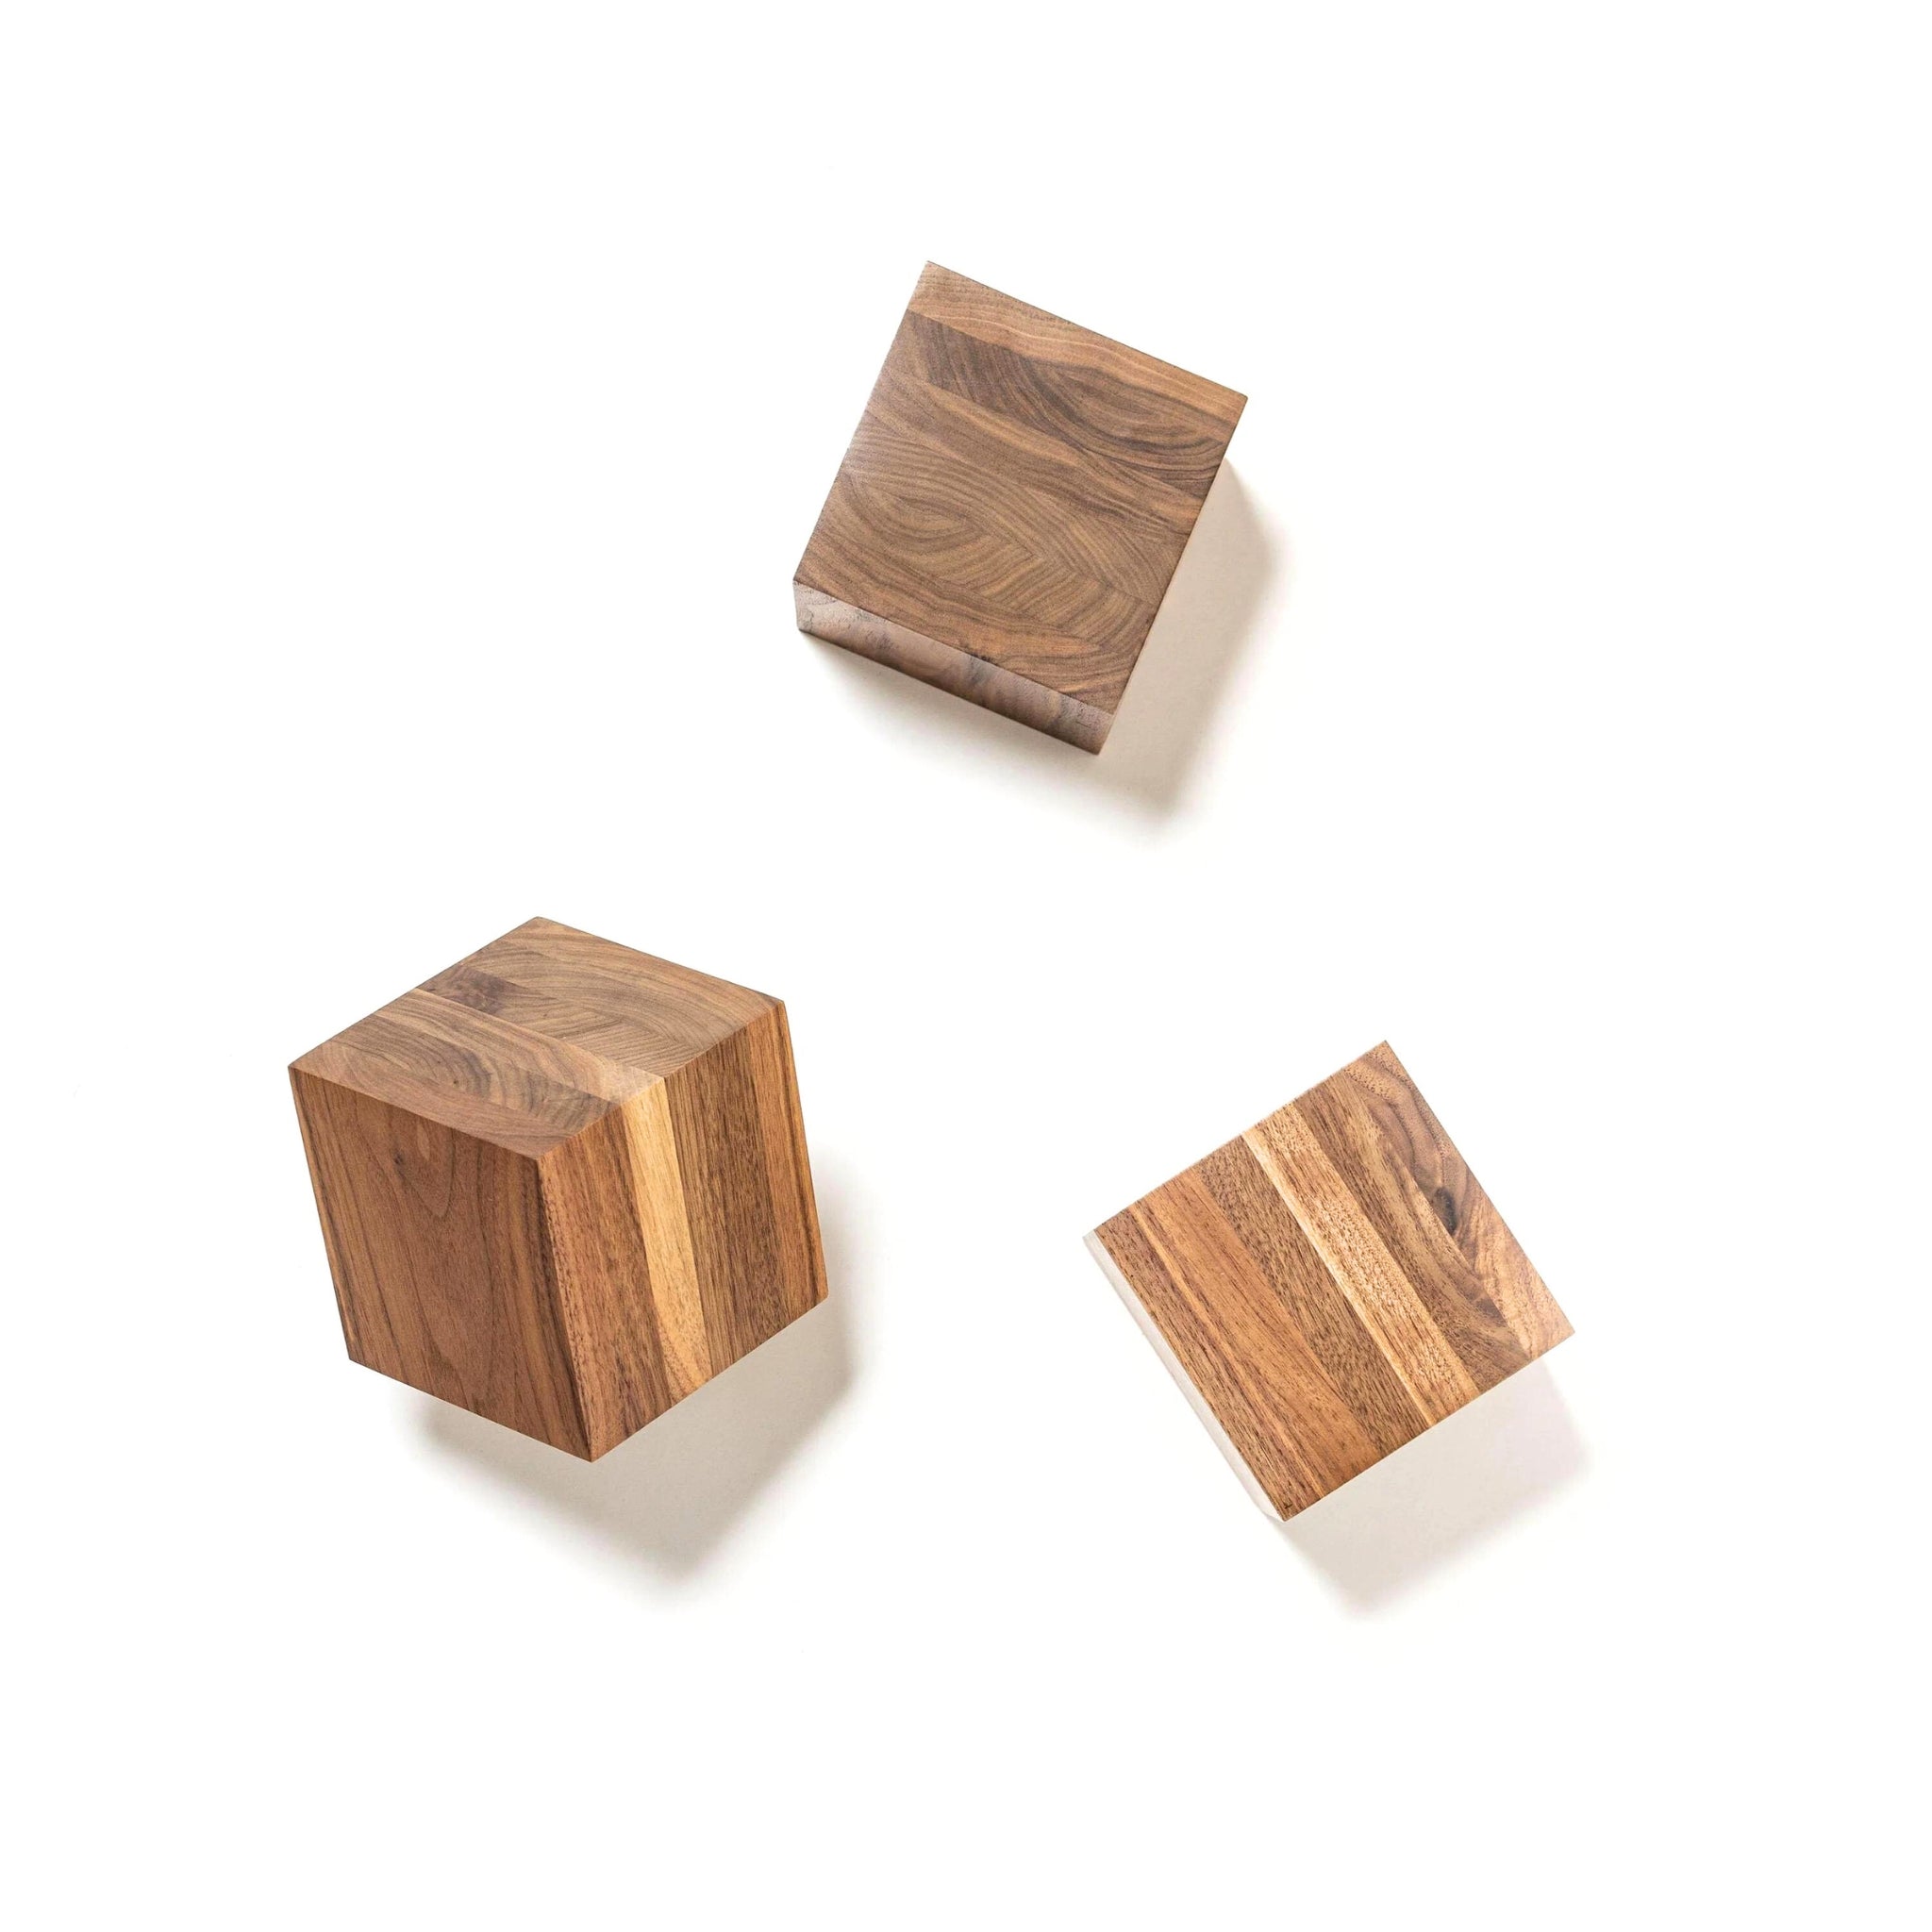 Juxstaposition of brown wooden small boxes used for presentation, on a white background.